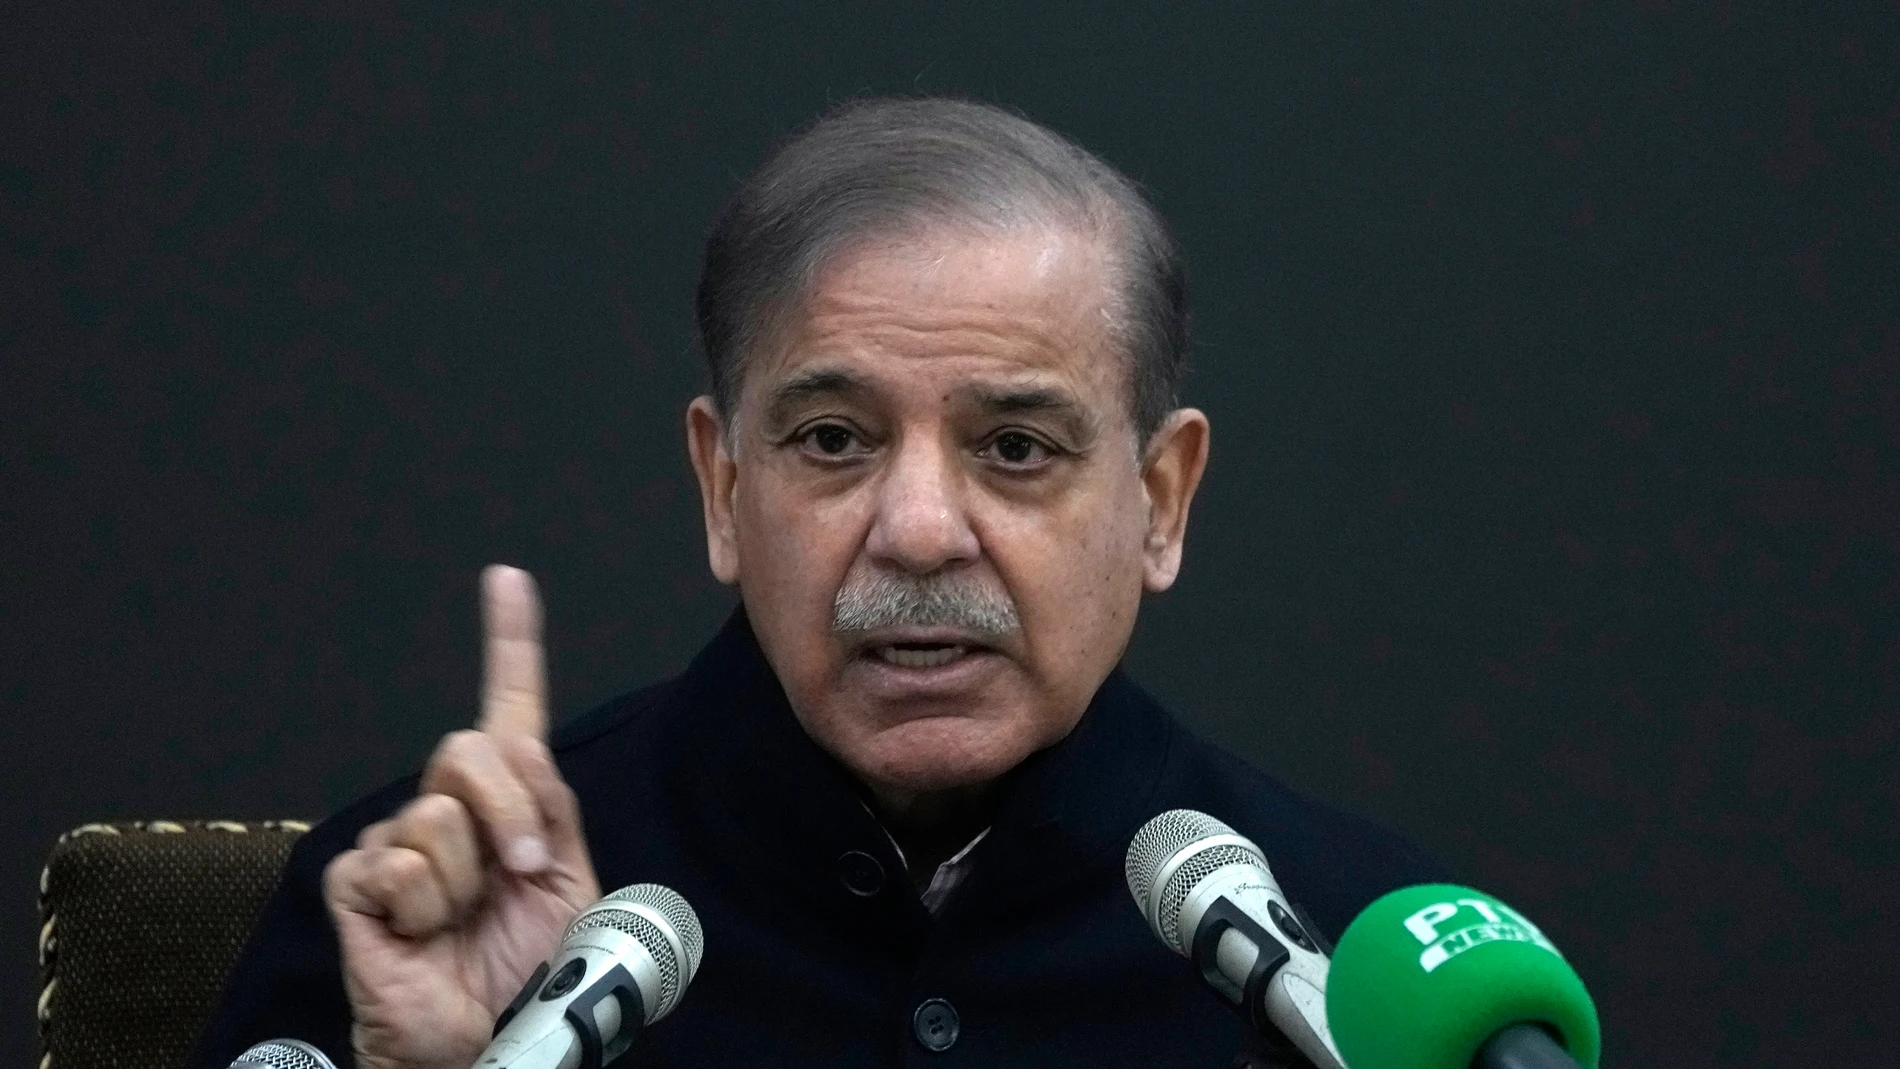 Pakistan's former Prime Minister Shehbaz Sharif speaks during a press conference regarding parliamentary elections, in Lahore, Pakistan, Tuesday, Feb. 13, 2024. Sharif, the main political rival of ex-Pakistani premier Imran Khan challenged him Tuesday to form a government if he had the support of the majority of the newly elected lawmakers in the parliament. (AP Photo/K.M. Chaudary)